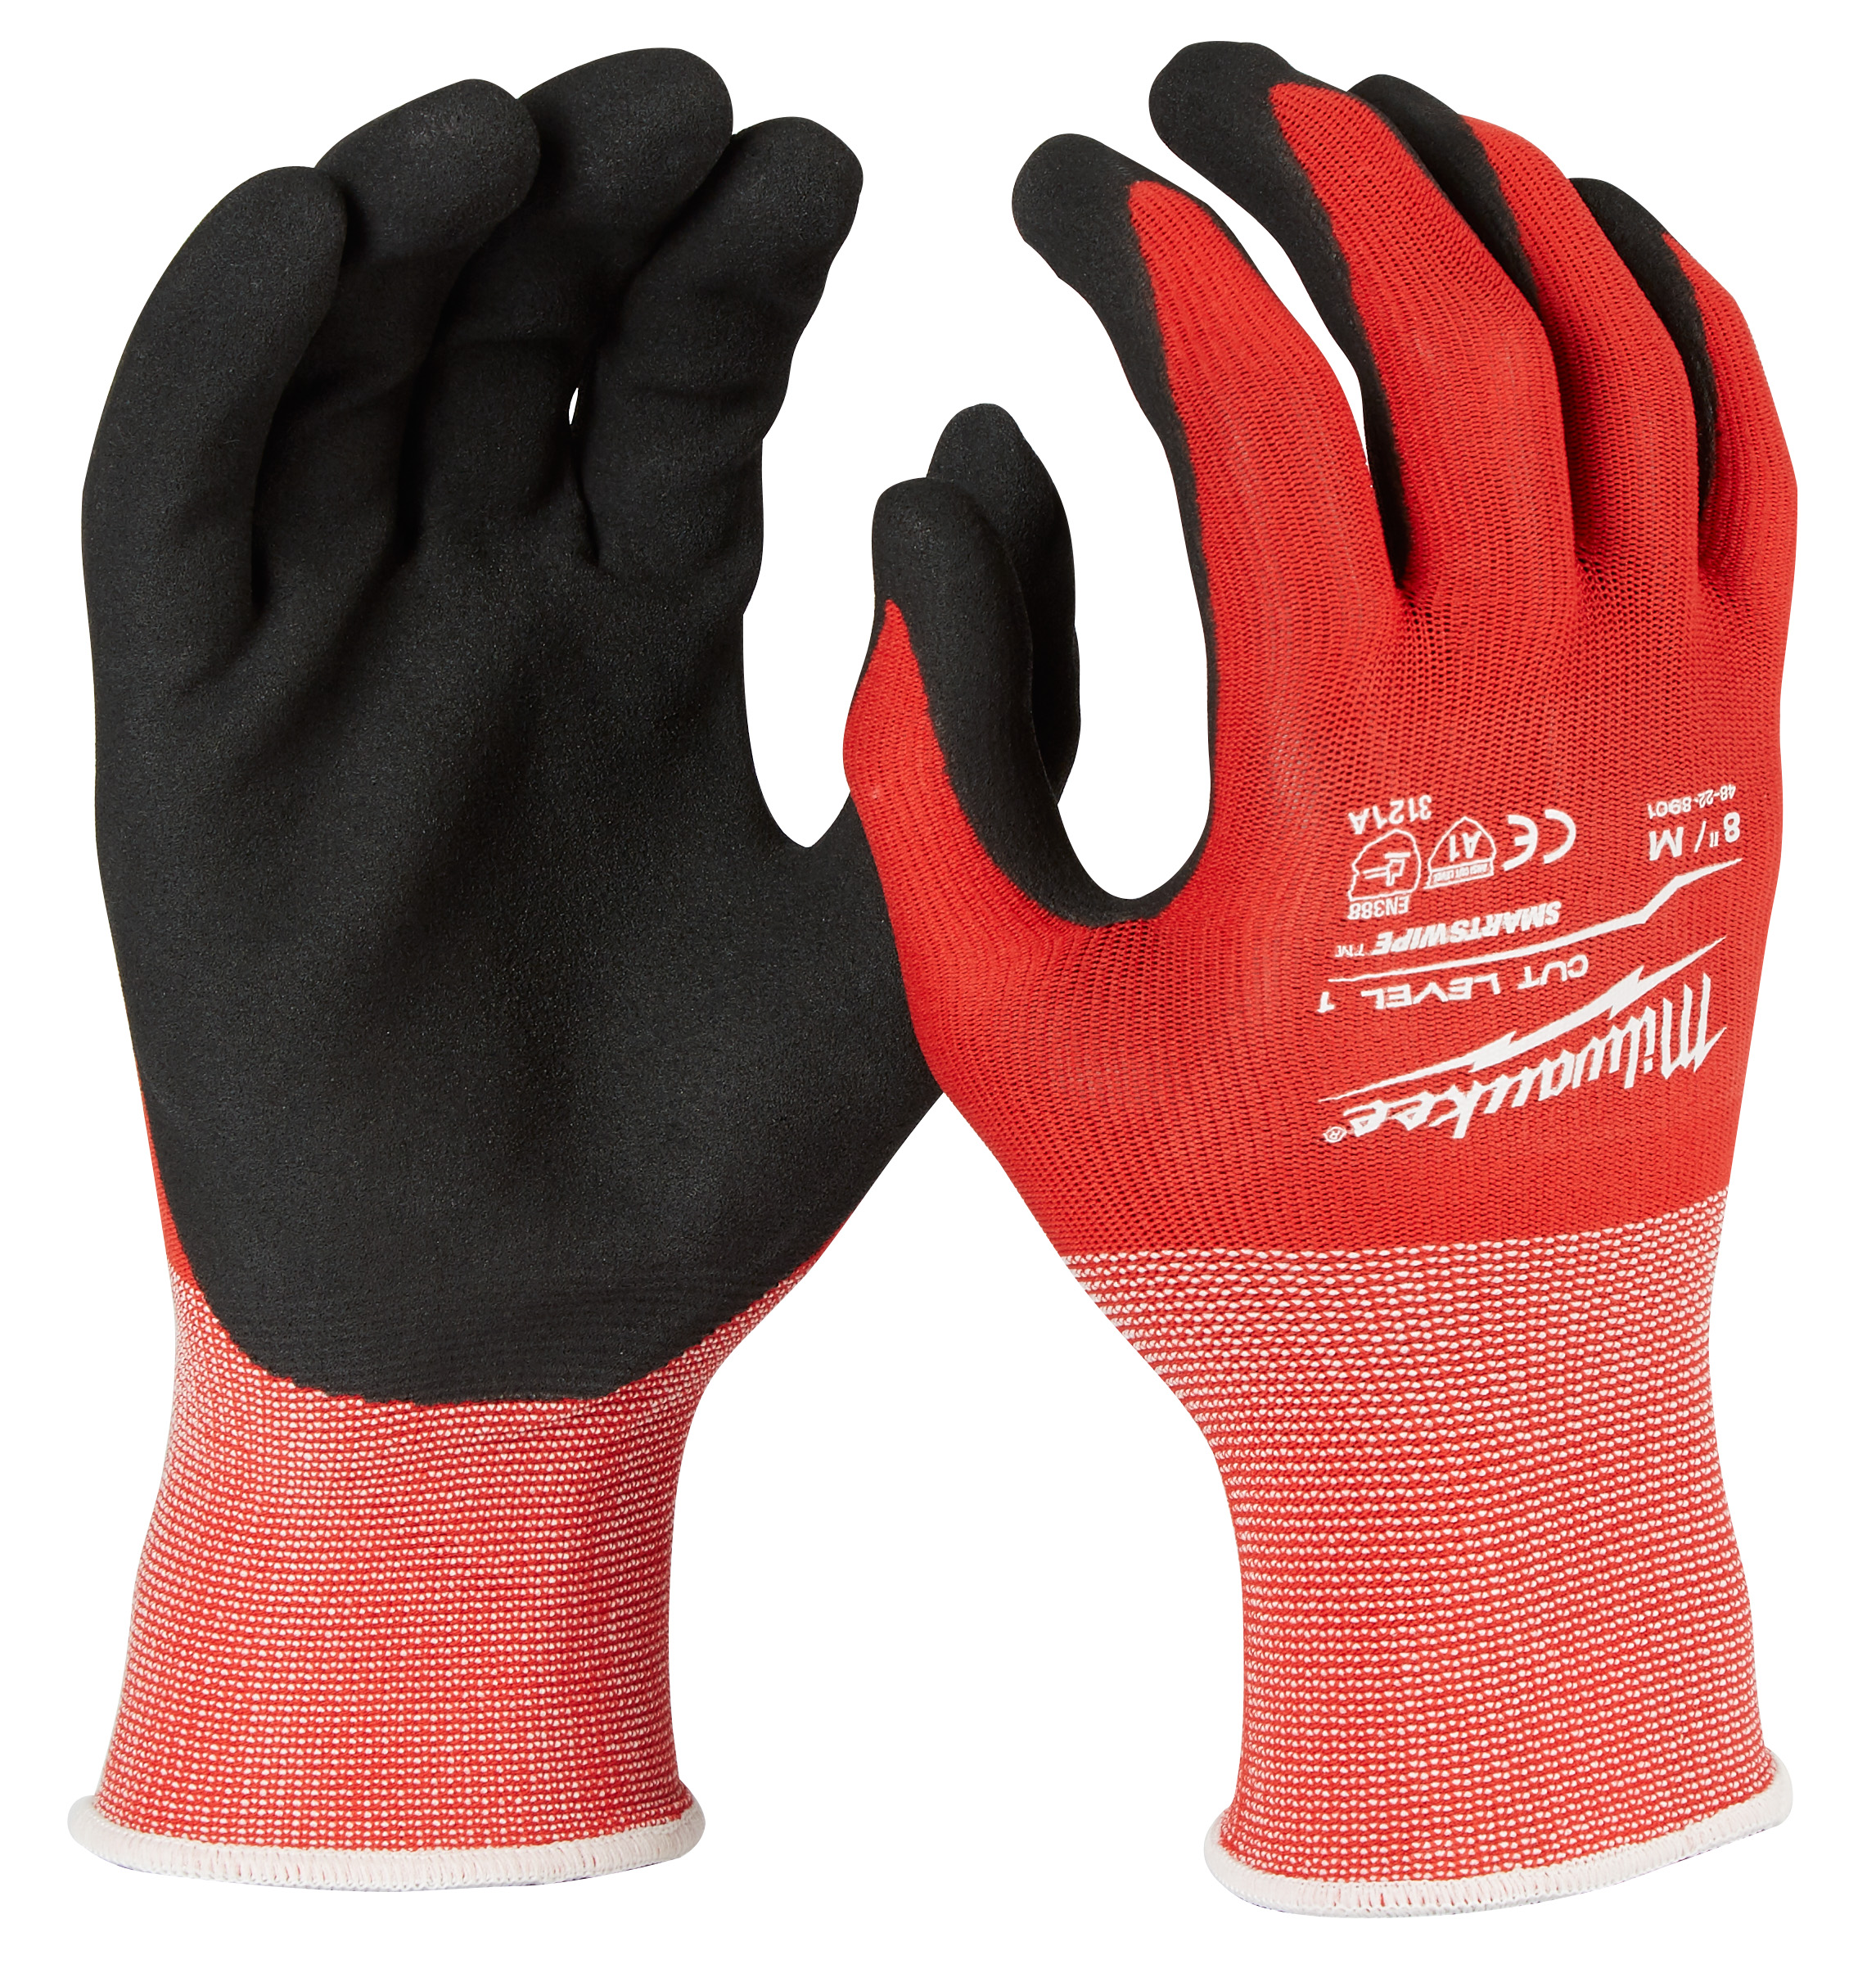 Milwaukee® 48-22-8901 Breathable Unisex Gloves, M, Nylon/Lycra Blend, Knit Cuff, Resists: Cut and Puncture, ANSI Cut-Resistance Level: A1, ANSI Puncture-Resistance Level: 1